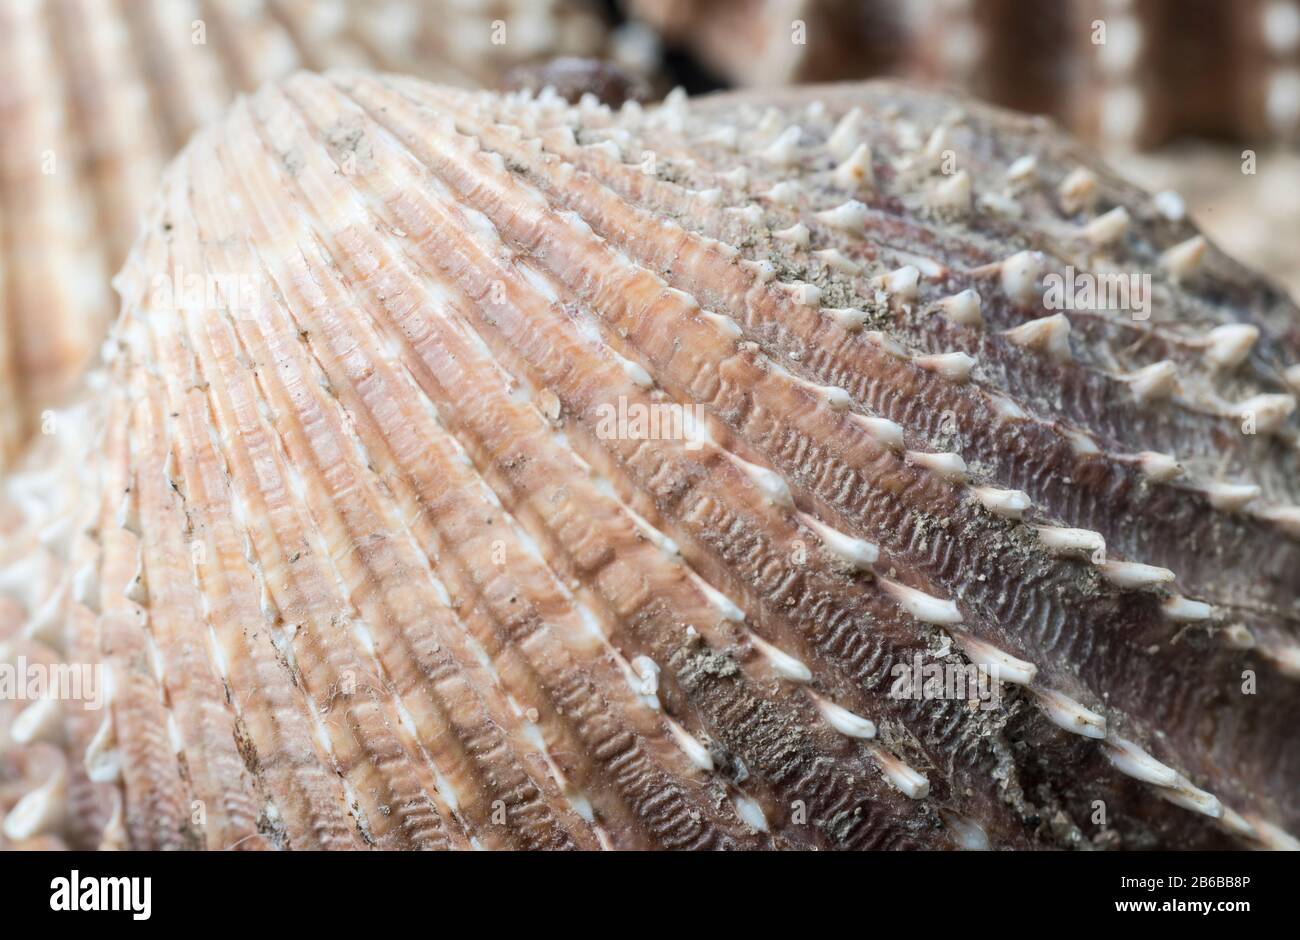 Shells of the Prickly Cockle (Acanthocardia echinata) Stock Photo